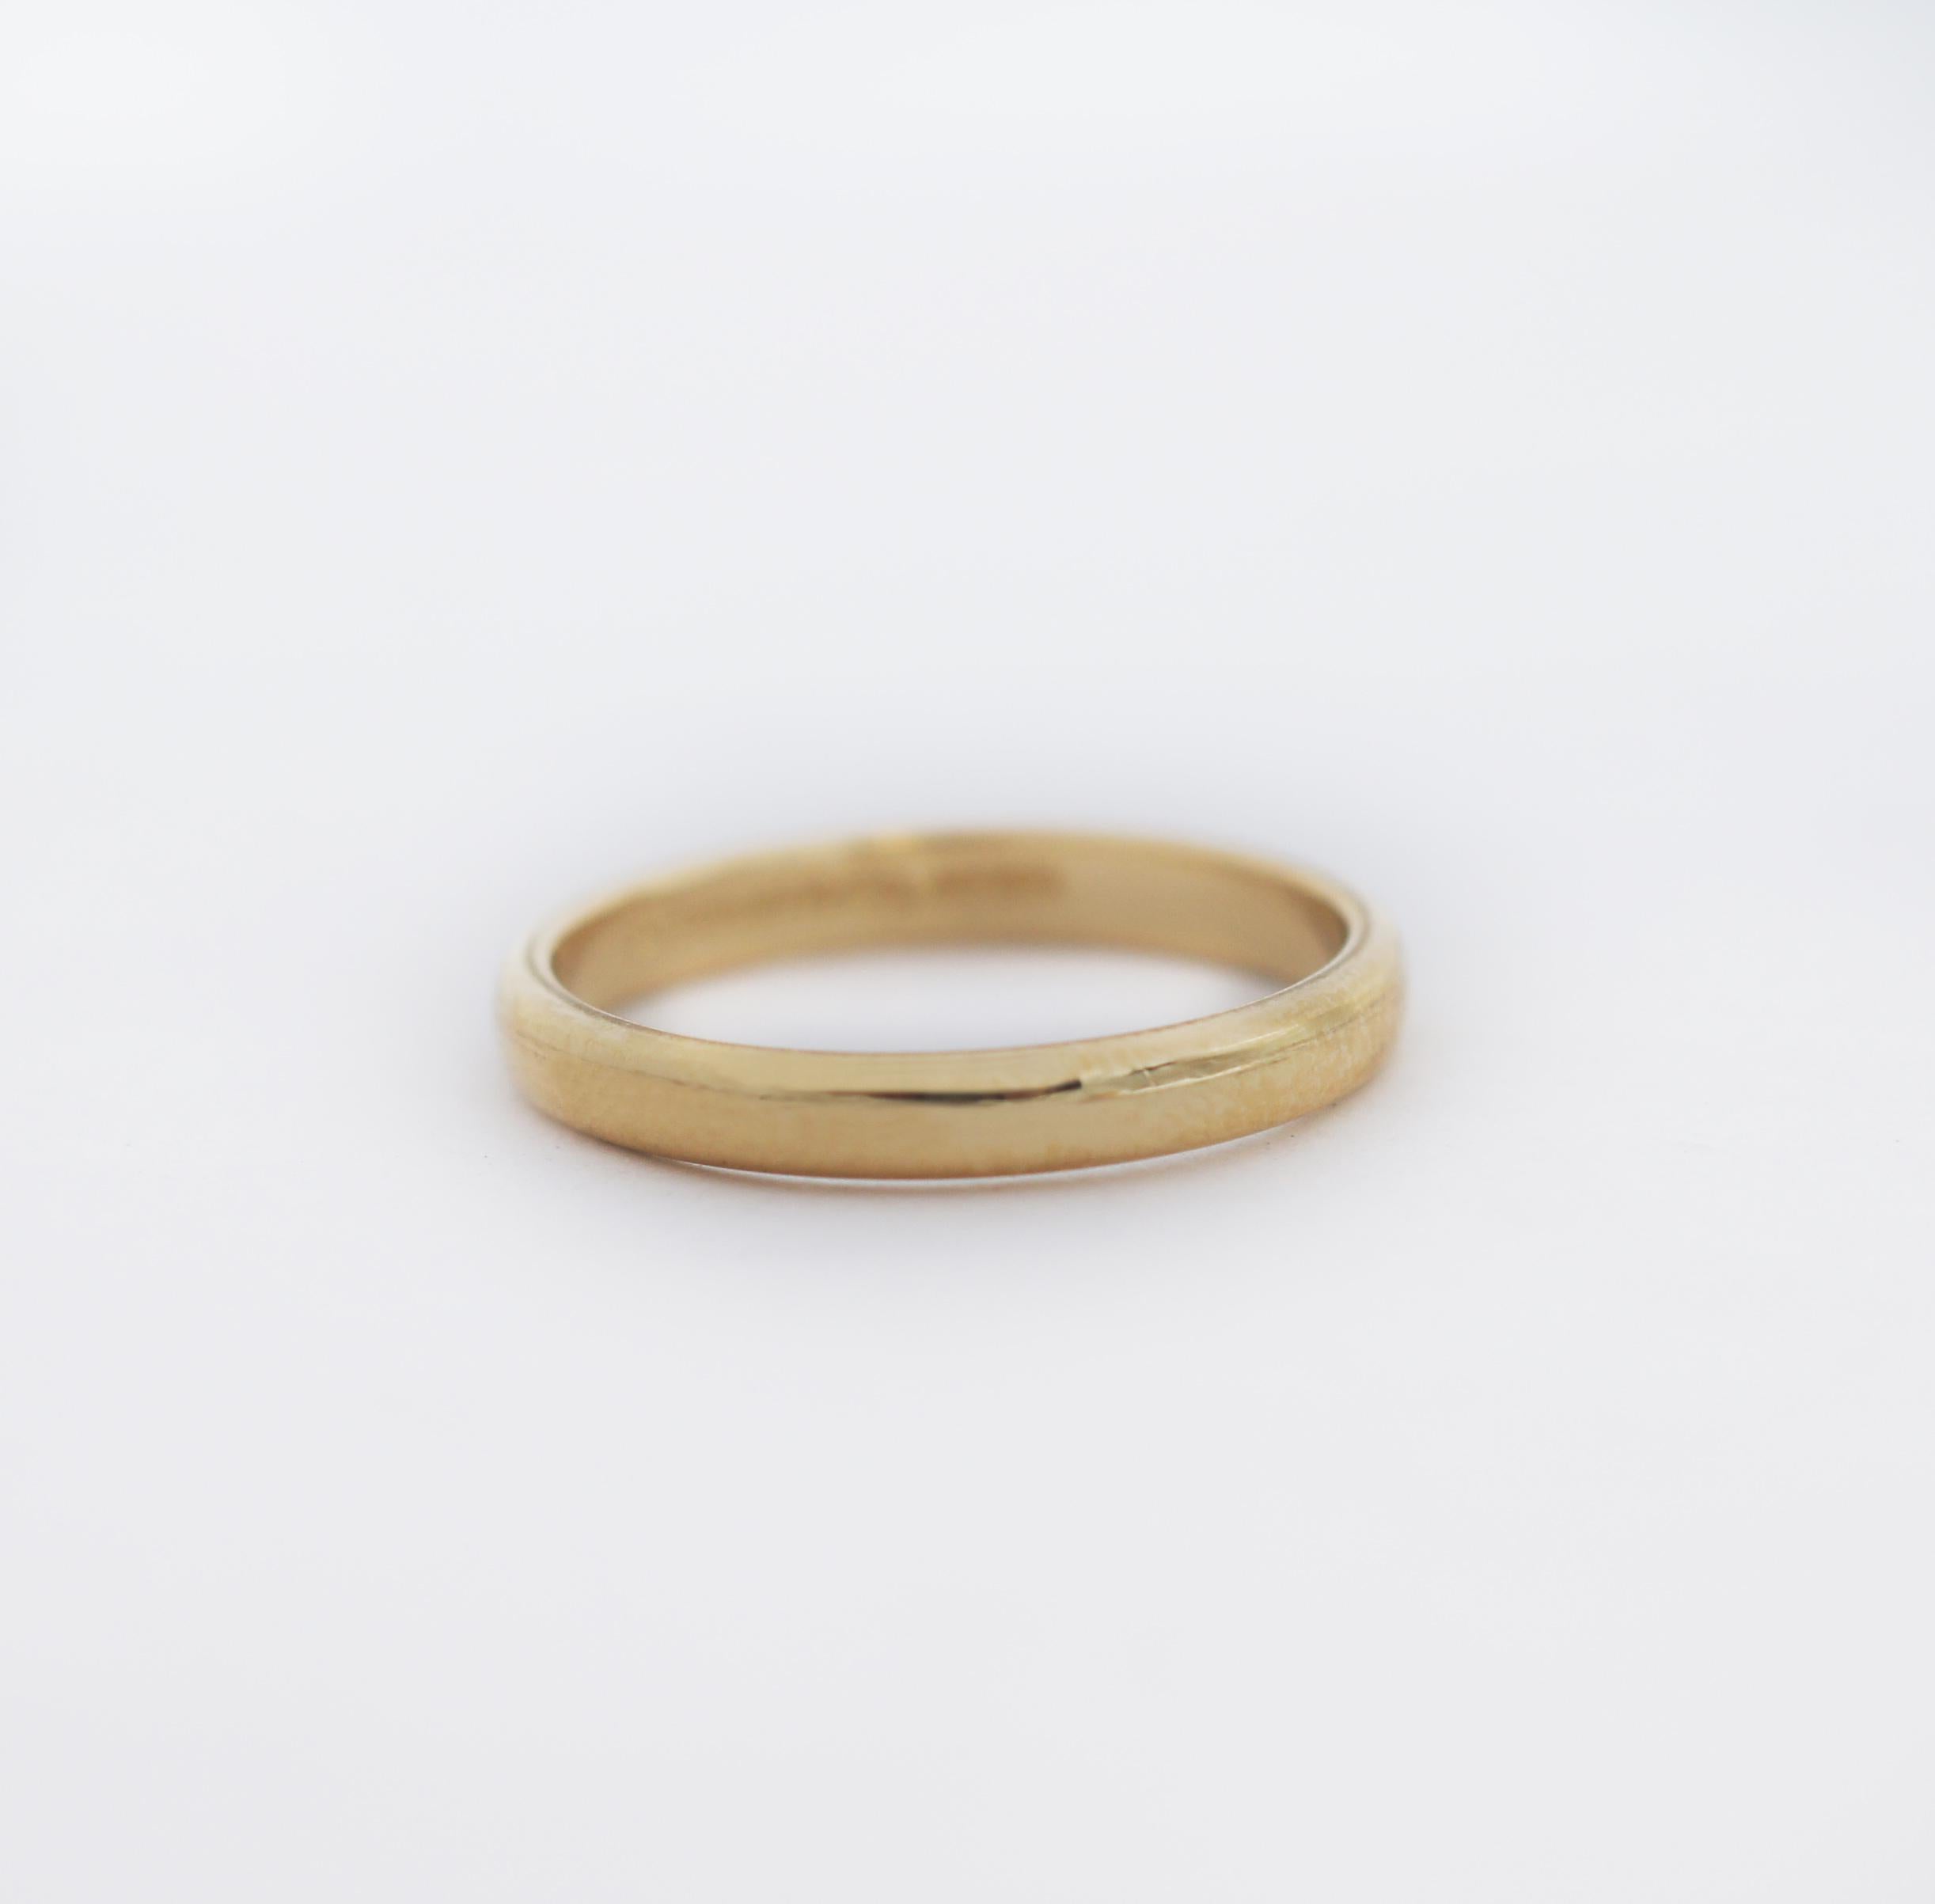 Tiffany & Co. 18K Gold Classic Wedding Band Ring In Good Condition For Sale In San Fernando, CA